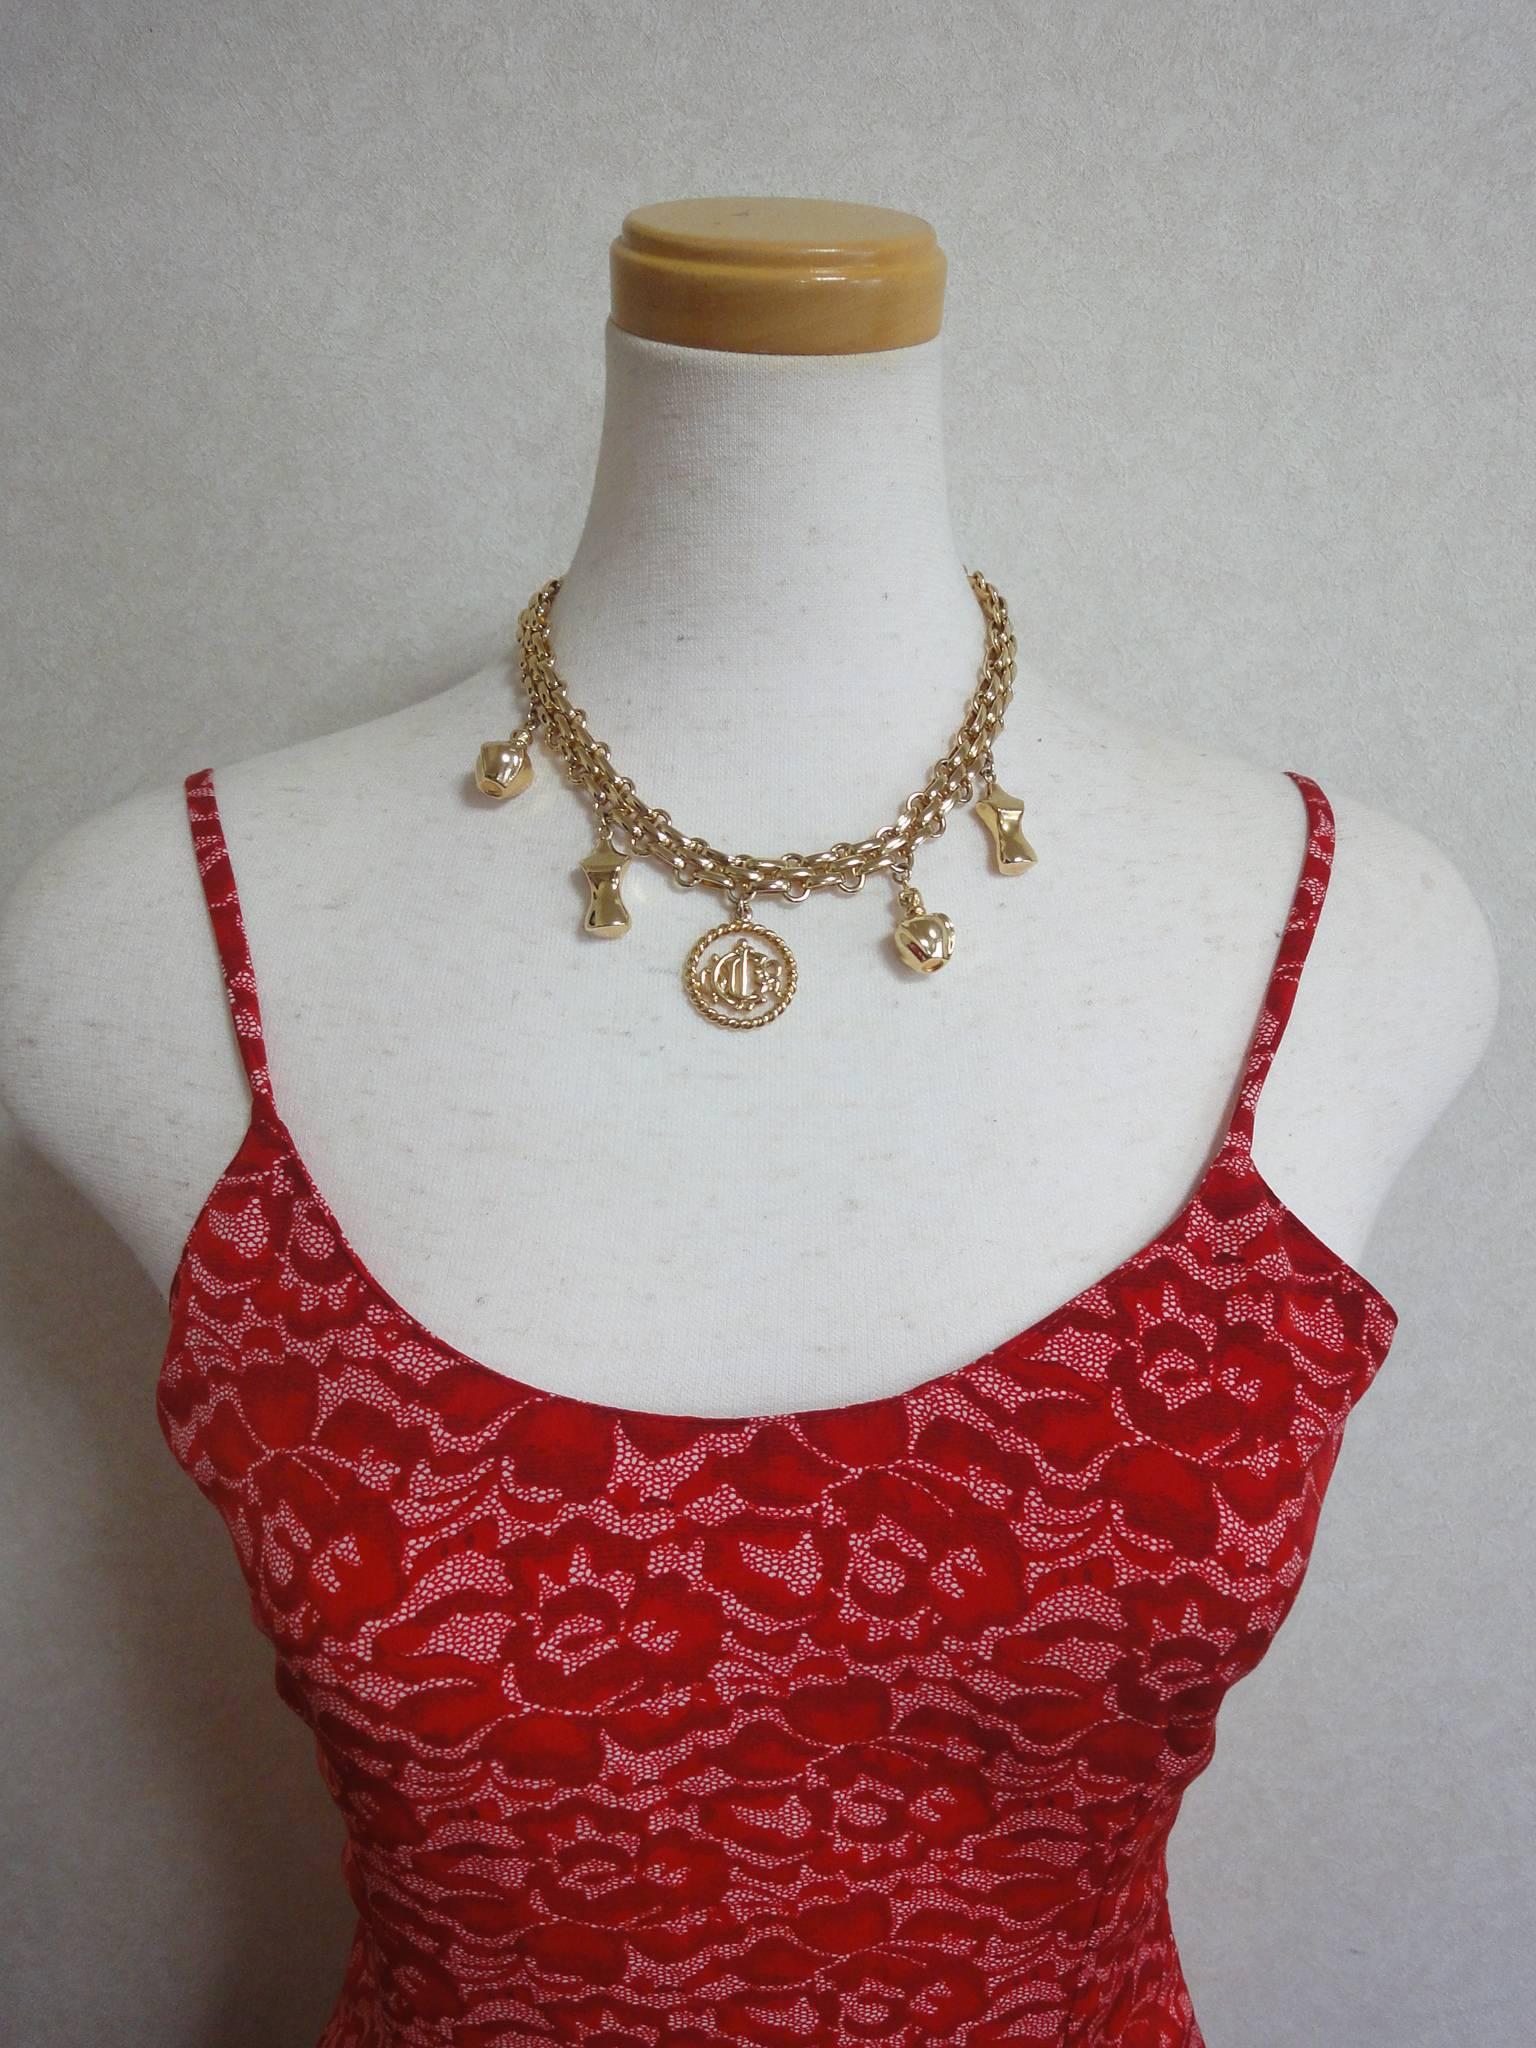 Vintage Christian Dior statement necklace with CD, perfume, torso motifs. Perfect Dior vintage jewelry gift

This is a vintage gold-tone luxury and gorgeous statement necklace!
Featuring dangling motifs of "Dior", torso, and perfume shape